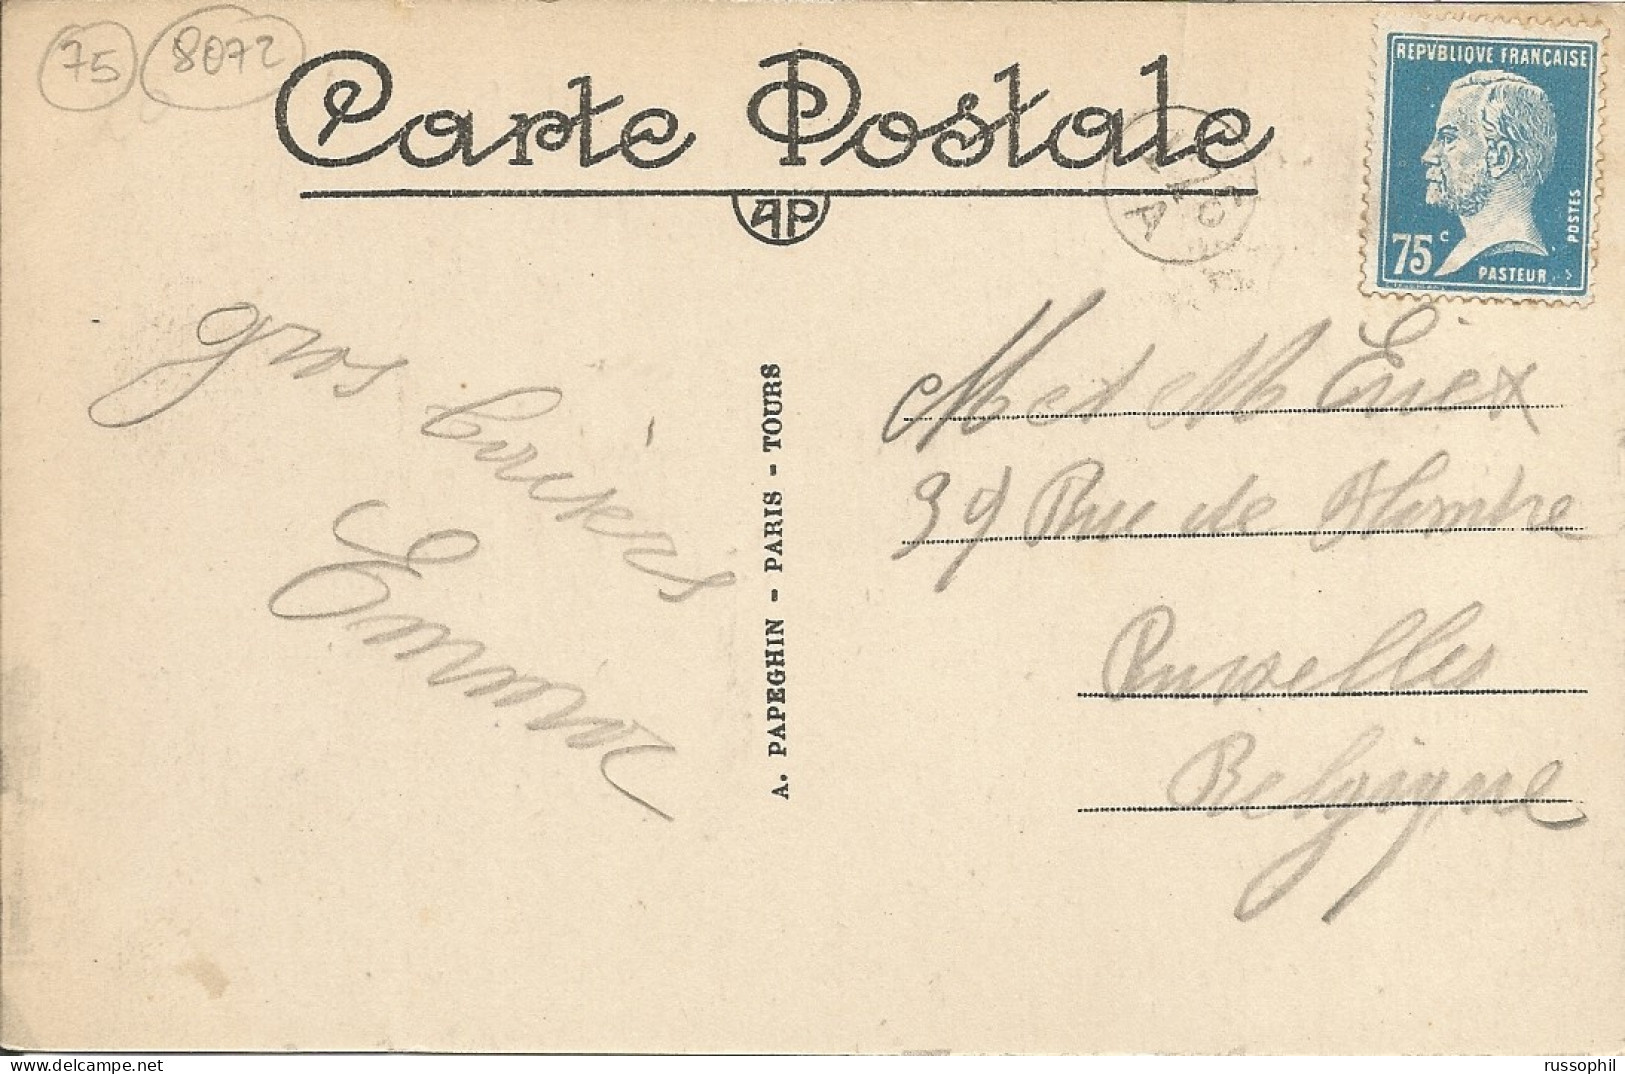 FRANCE -  VARIETY & CURIOSITY - Yv #177 ALONE FRANKING PC TO BELGIUM - PC DISTRIBUTED BUT STAMP NOT CANCELLED - 1926 - Briefe U. Dokumente